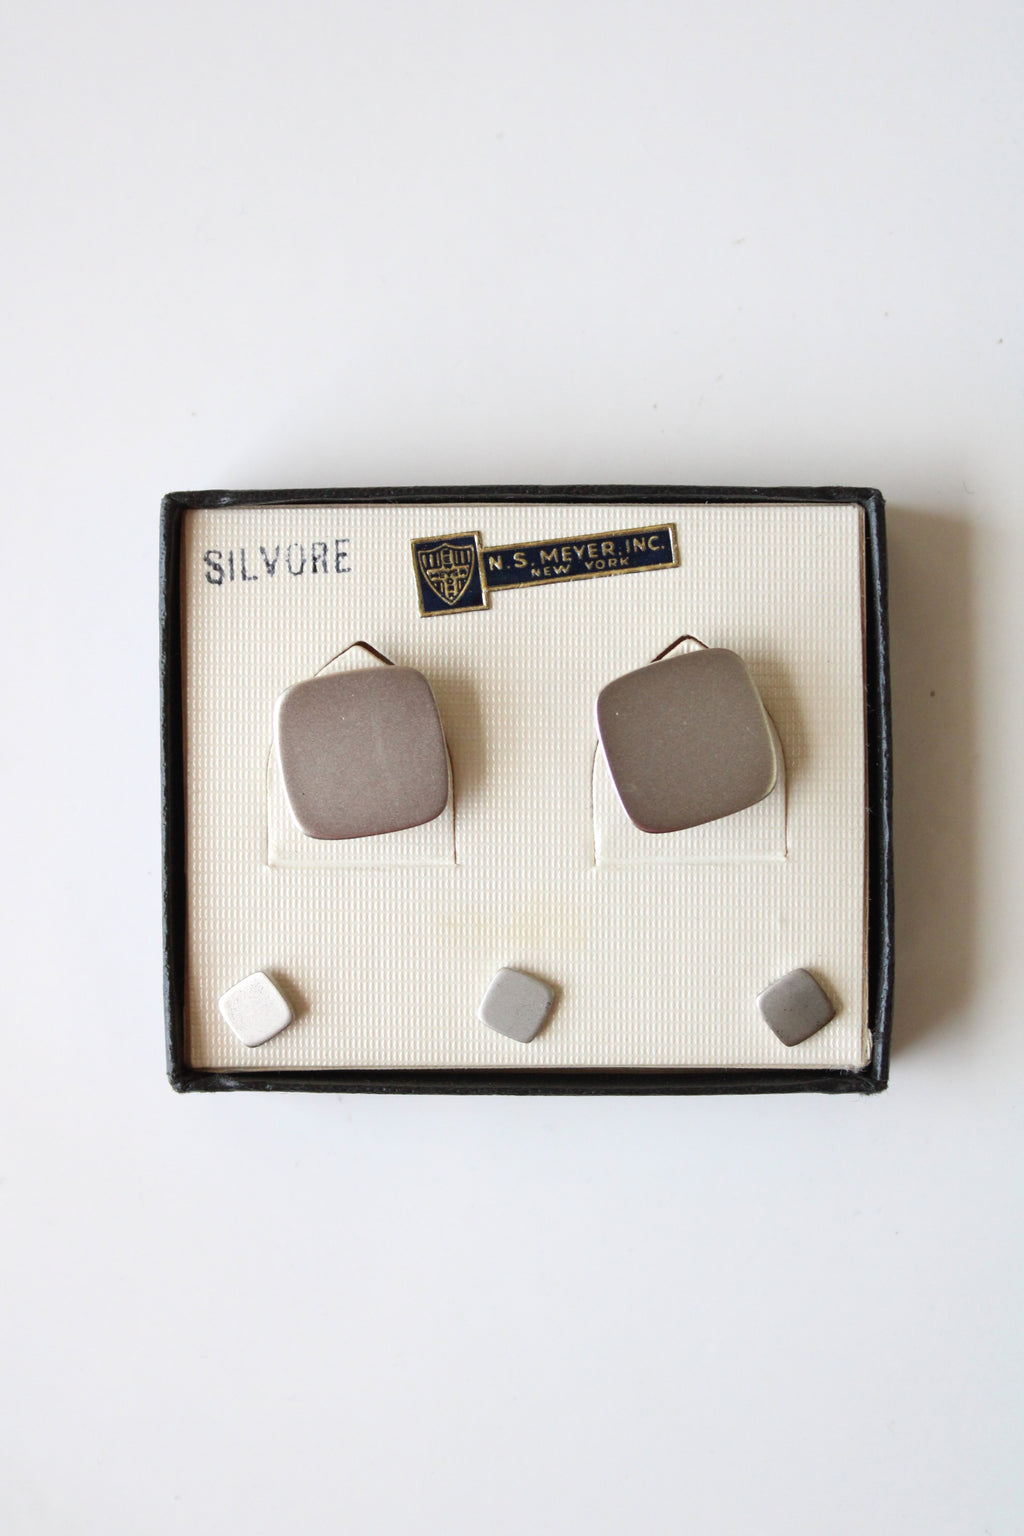 N.S. Myer Inc. New York Silvore Silver Cuff Links & Button Stud Pins Set